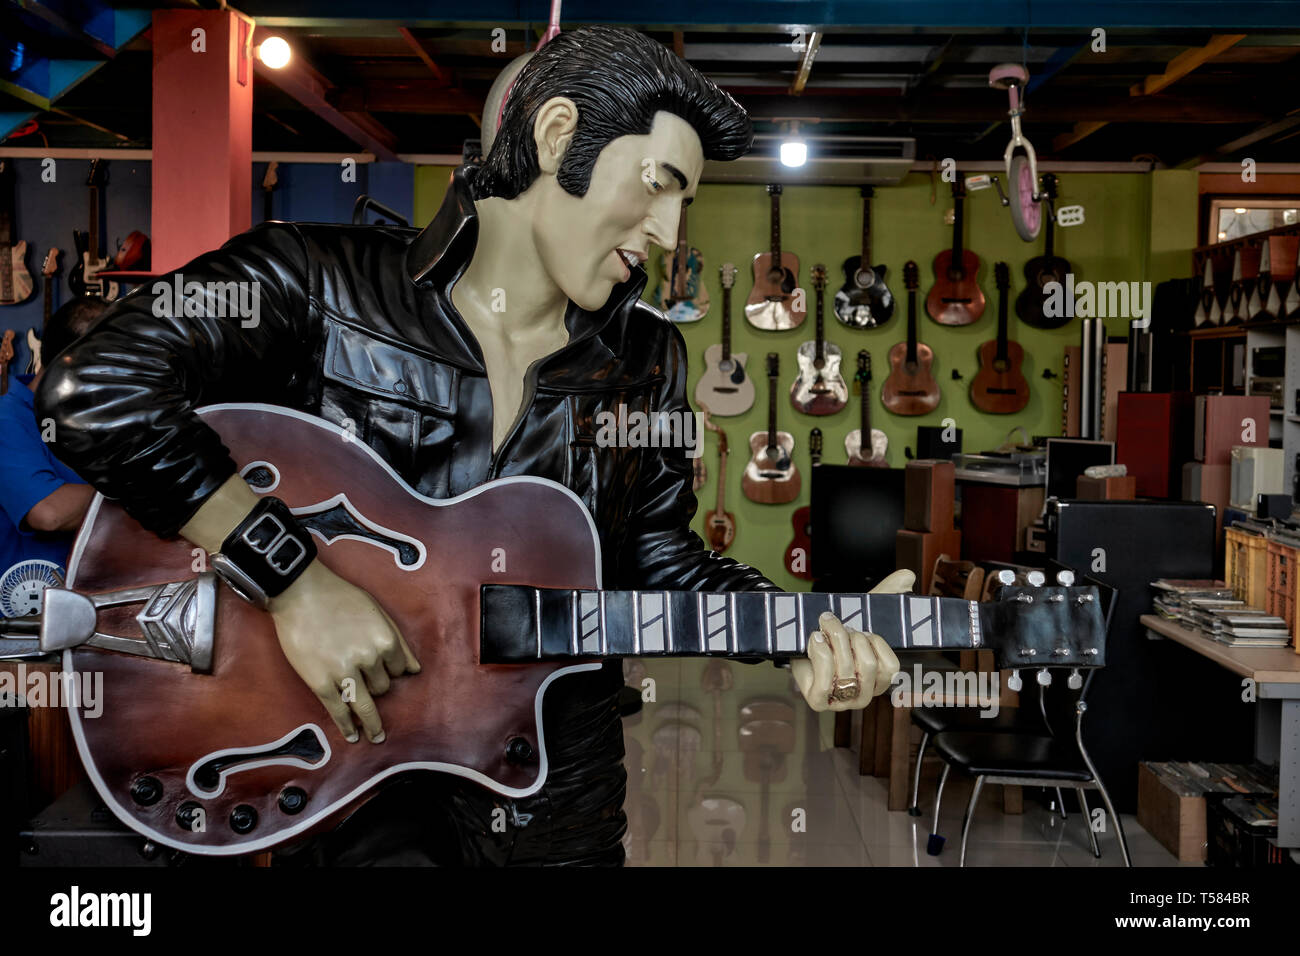 Guitar shop featuring a statue of Elvis Presley playing the guitar. Thailand  Southeast Asia Stock Photo - Alamy